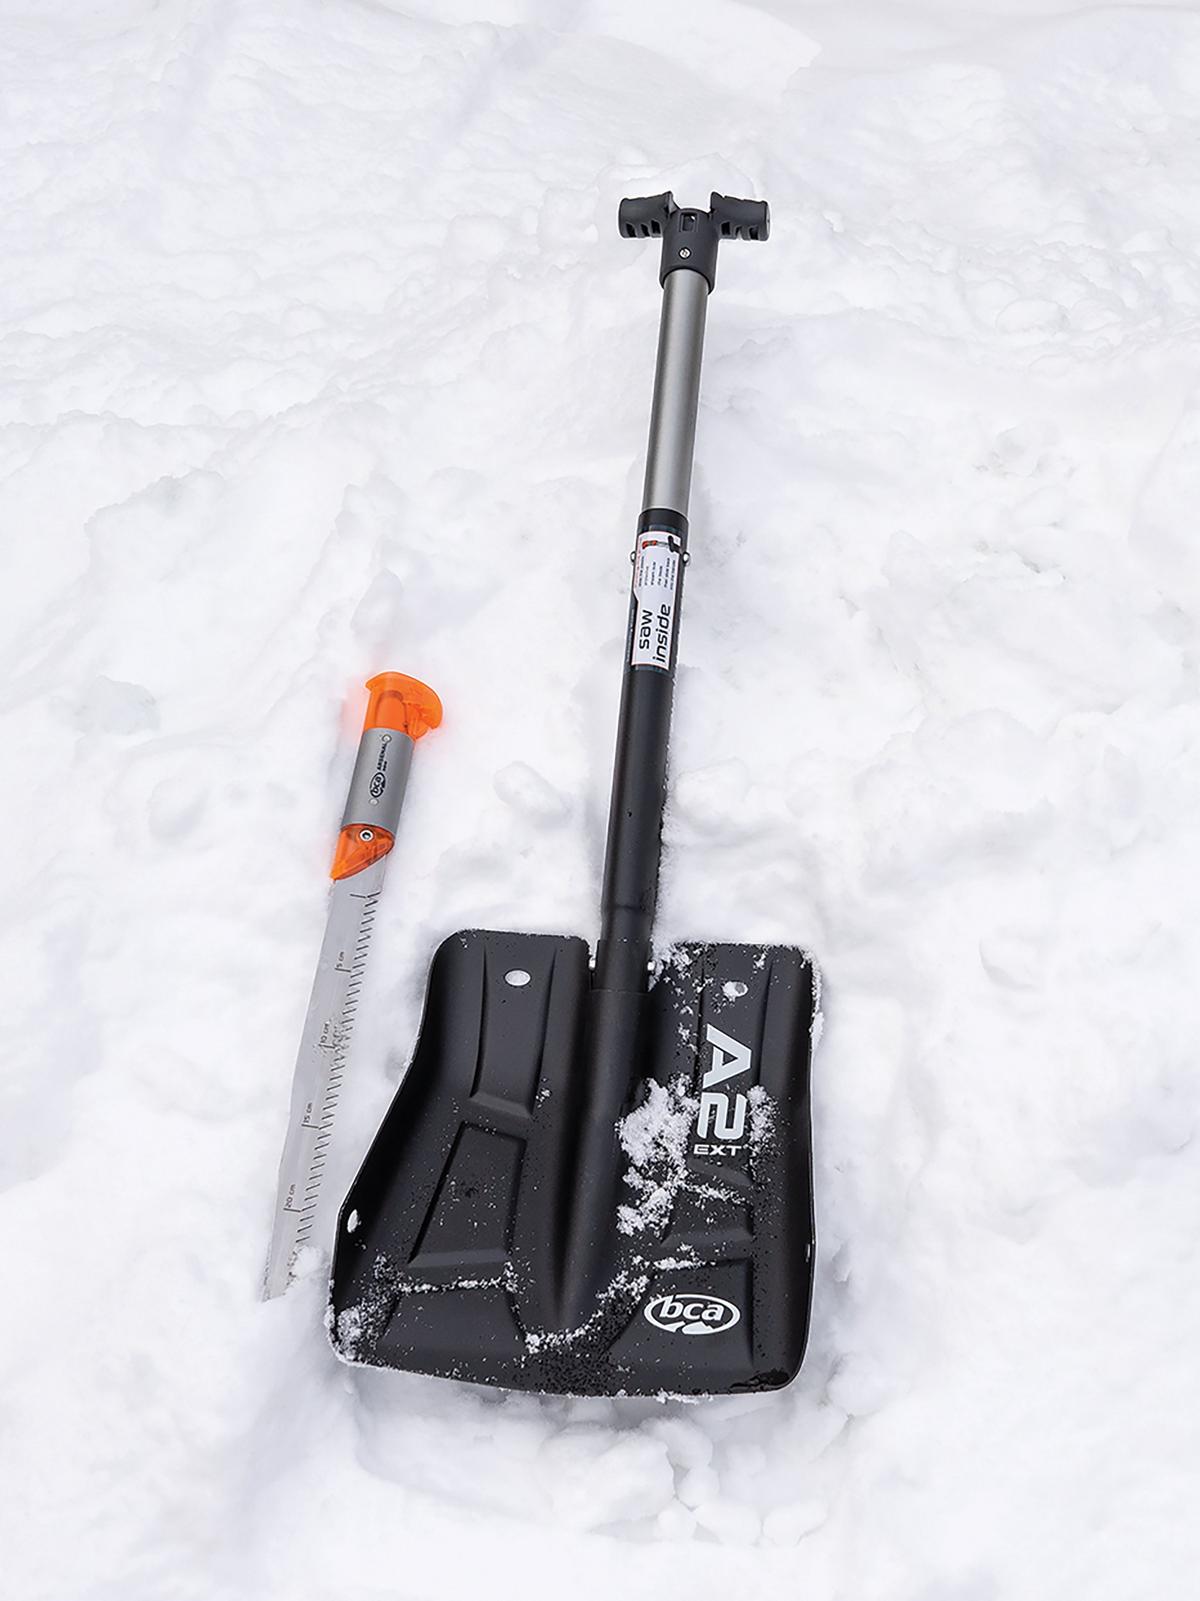 Details about   Bca A2 Ext Arsenal Avalanche Shovel W/11 3/8in Saw Transceiver Backcountry